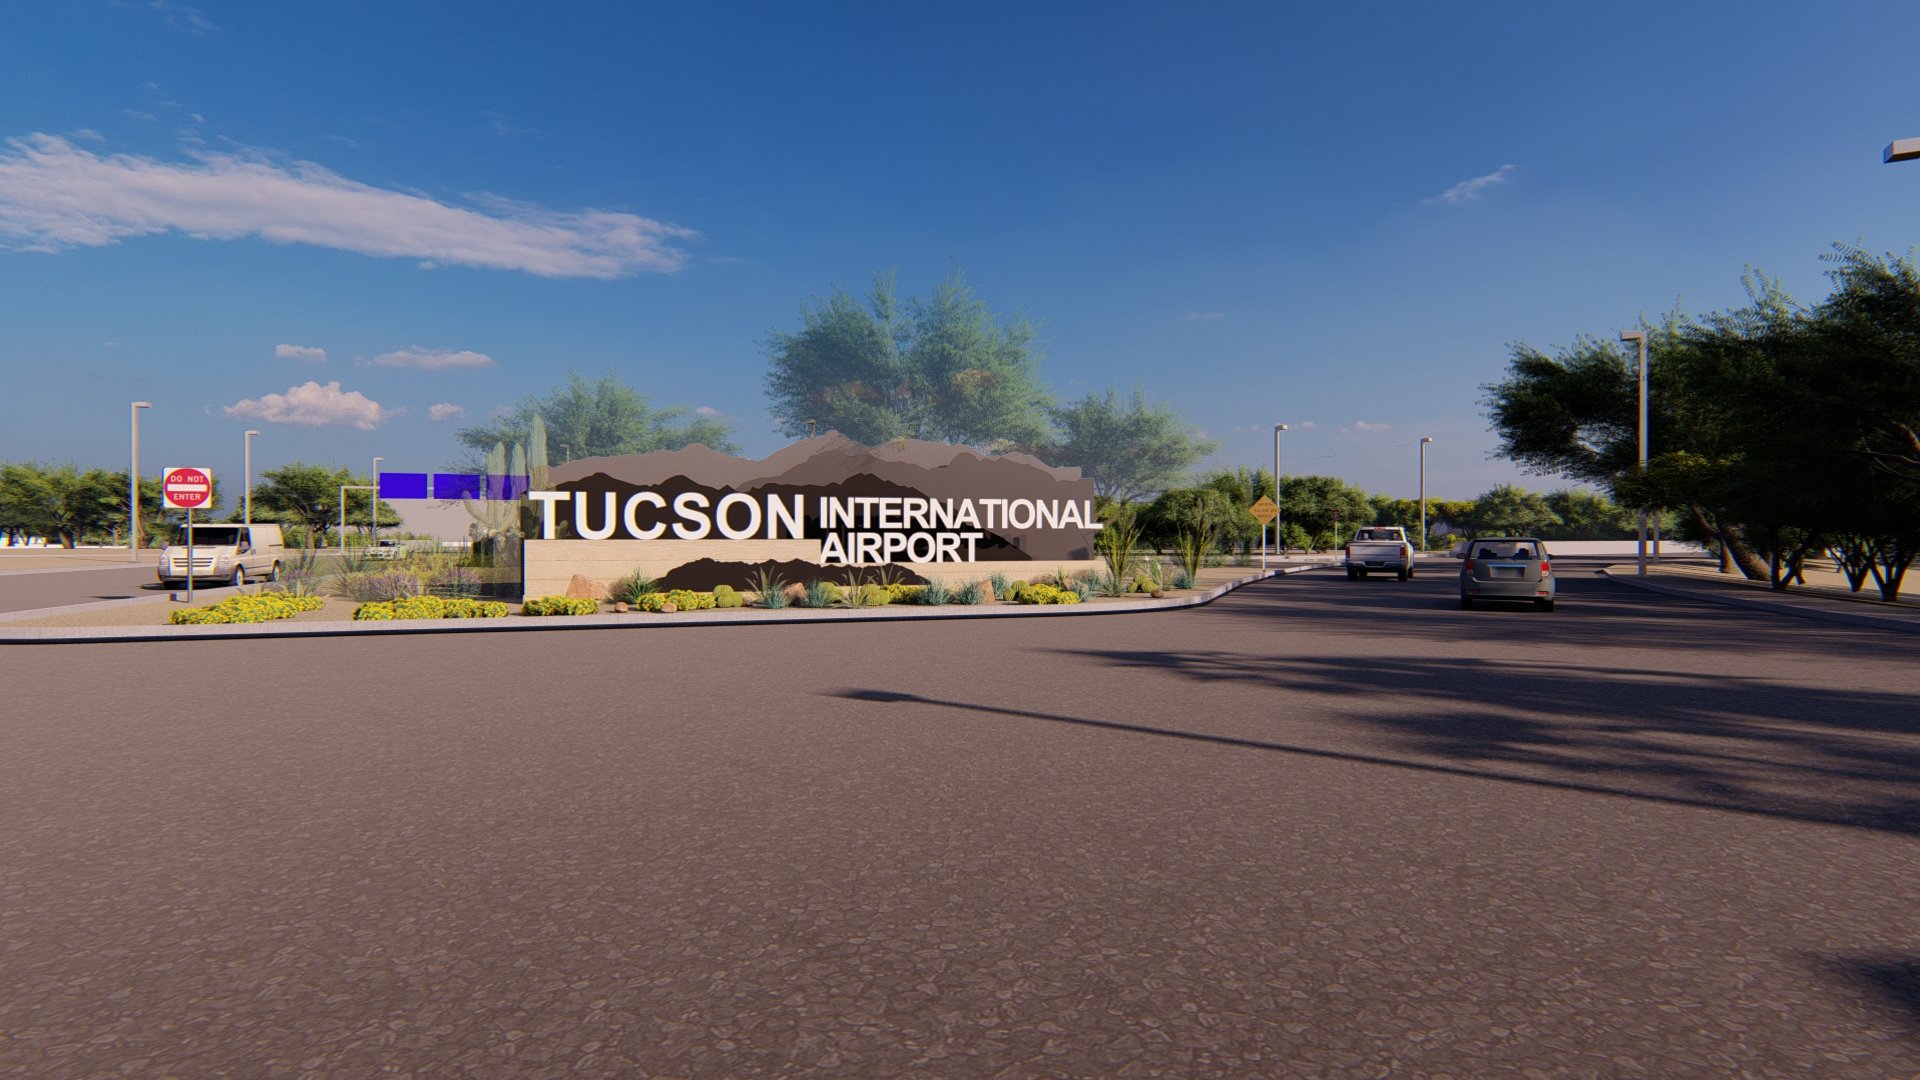 TUSCON INTERNATIONAL AIRPORT ENTRY MONUMENT